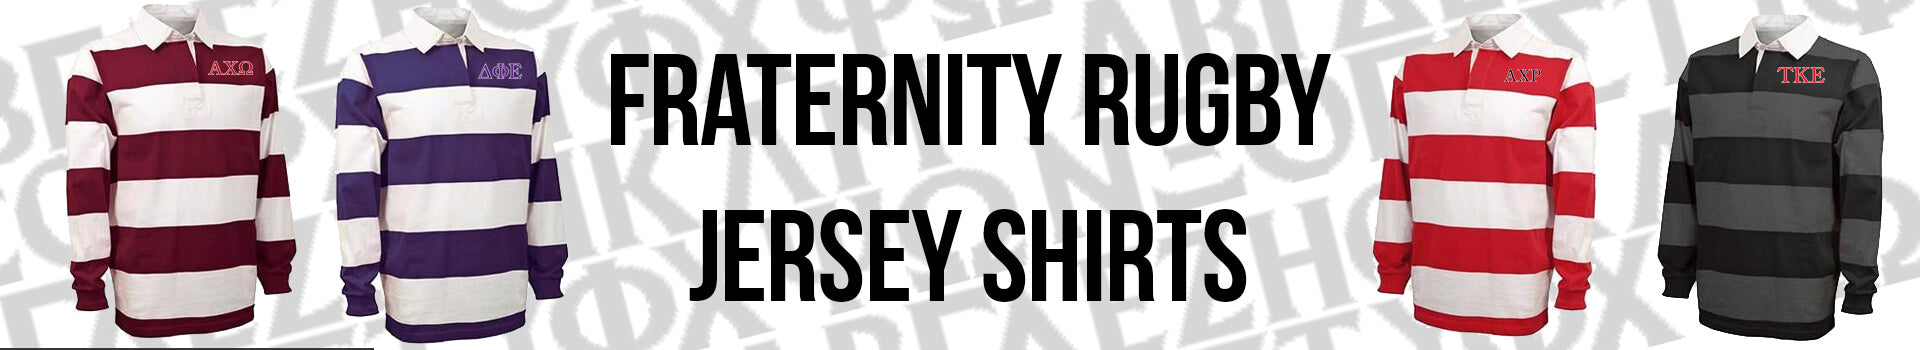 Custom Greek Fraternity Rugby Sports Jerseys and Shirts